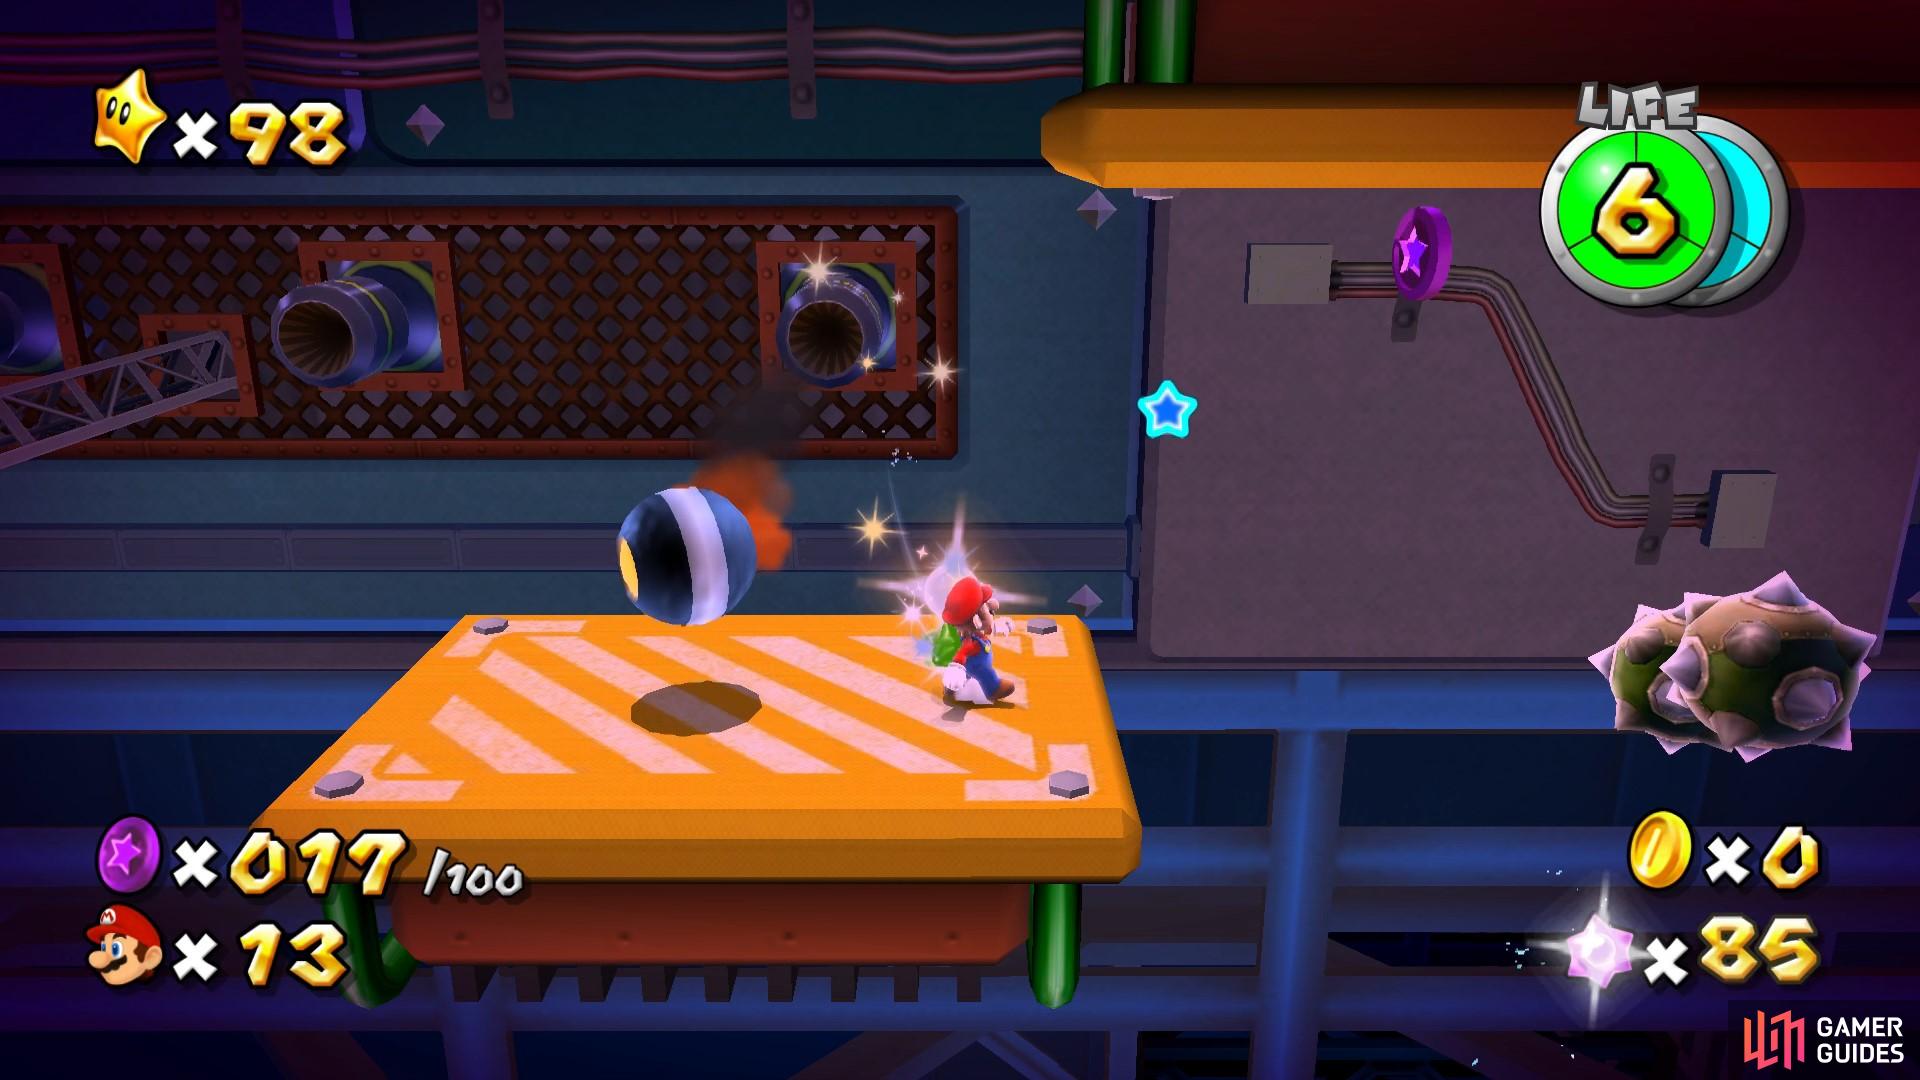 After grabbing the first 17 Purple Coins, you'll need to jump up onto an upside down platform.